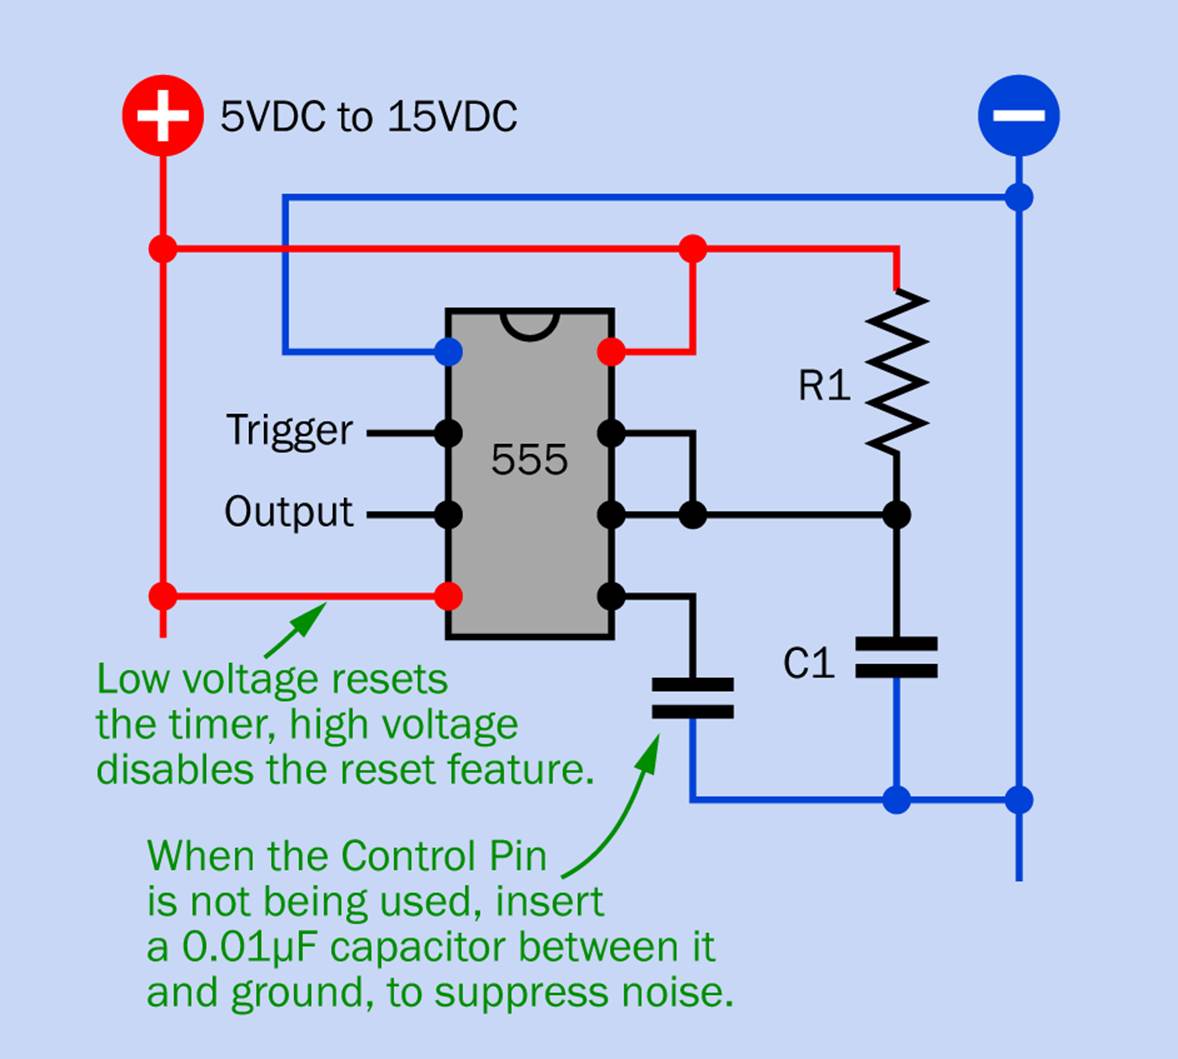 A simplified schematic showing typical connections of a 555 timer in monostable mode.